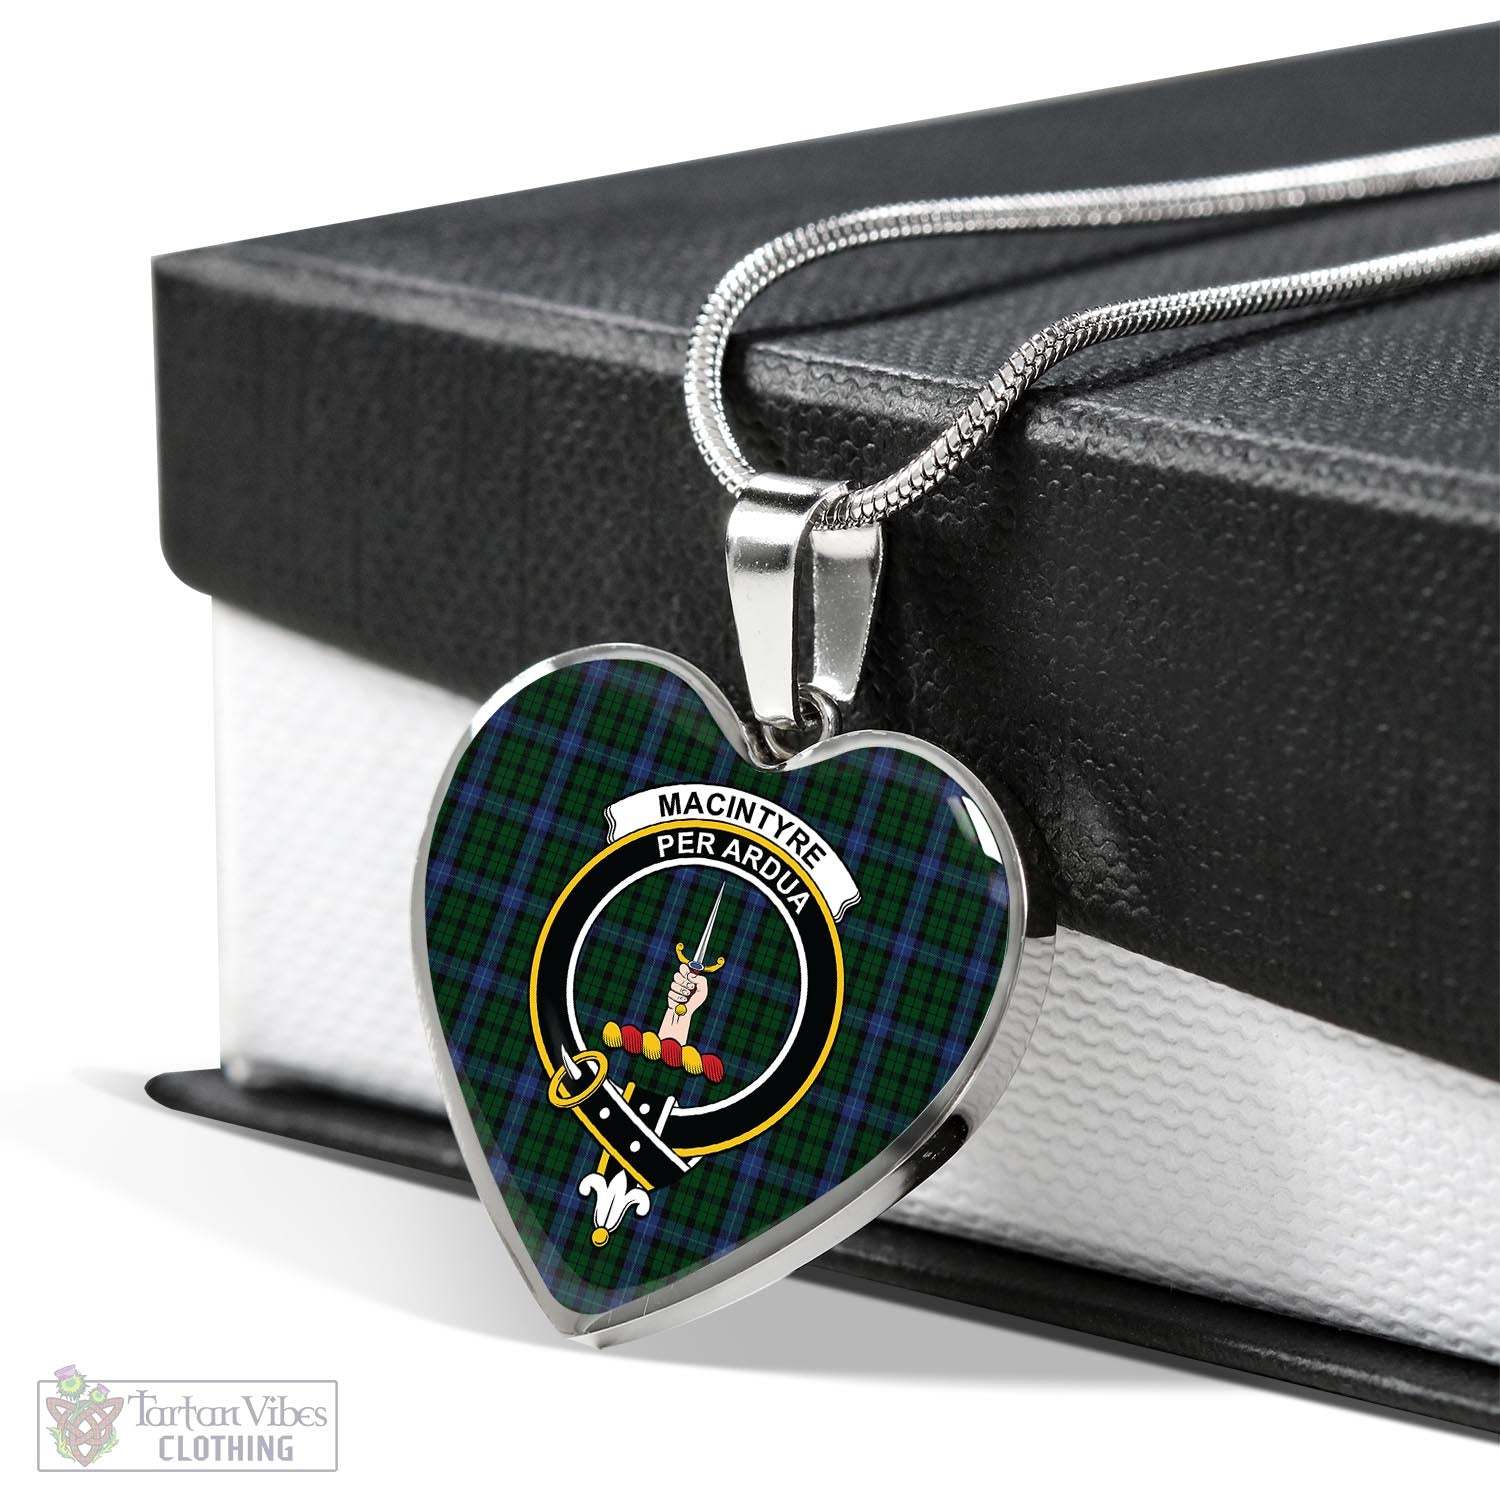 Tartan Vibes Clothing MacIntyre Tartan Heart Necklace with Family Crest